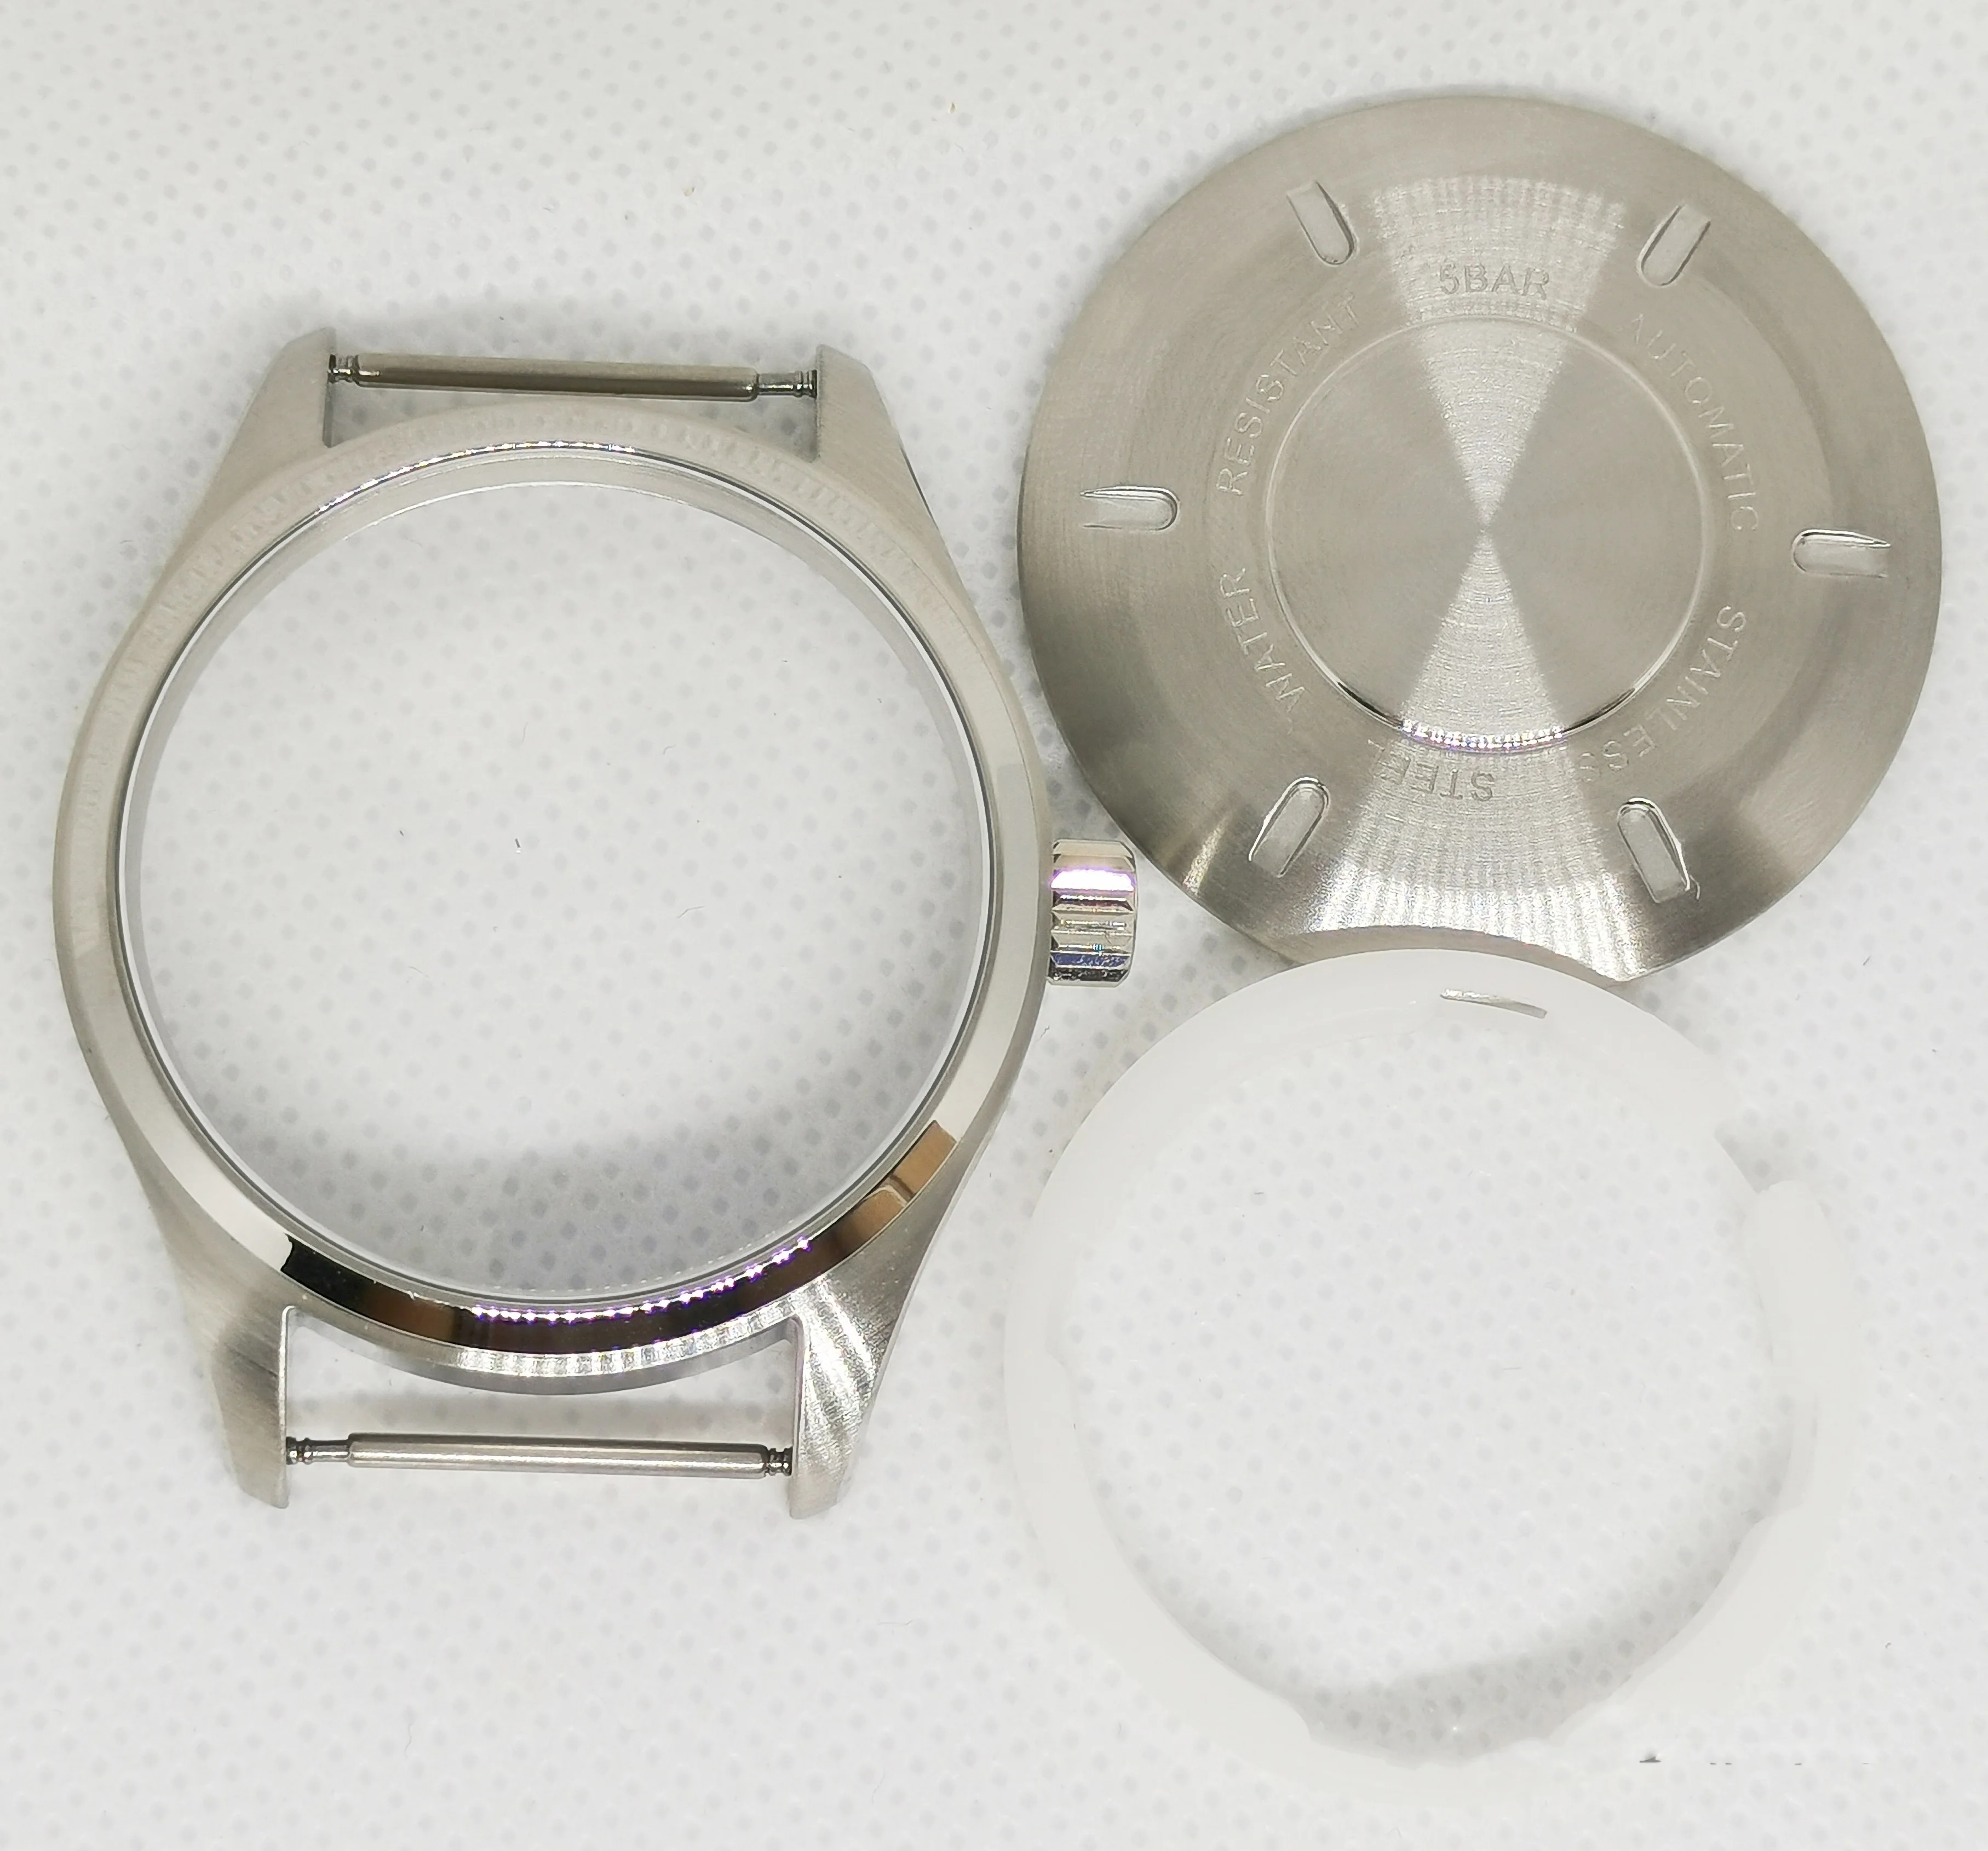 

Watch Parts 40MM Case 316 Stainless Steel Mineral Glass Fit NH35 NH36 ETA 2836 2824 2892 Automatic Movement